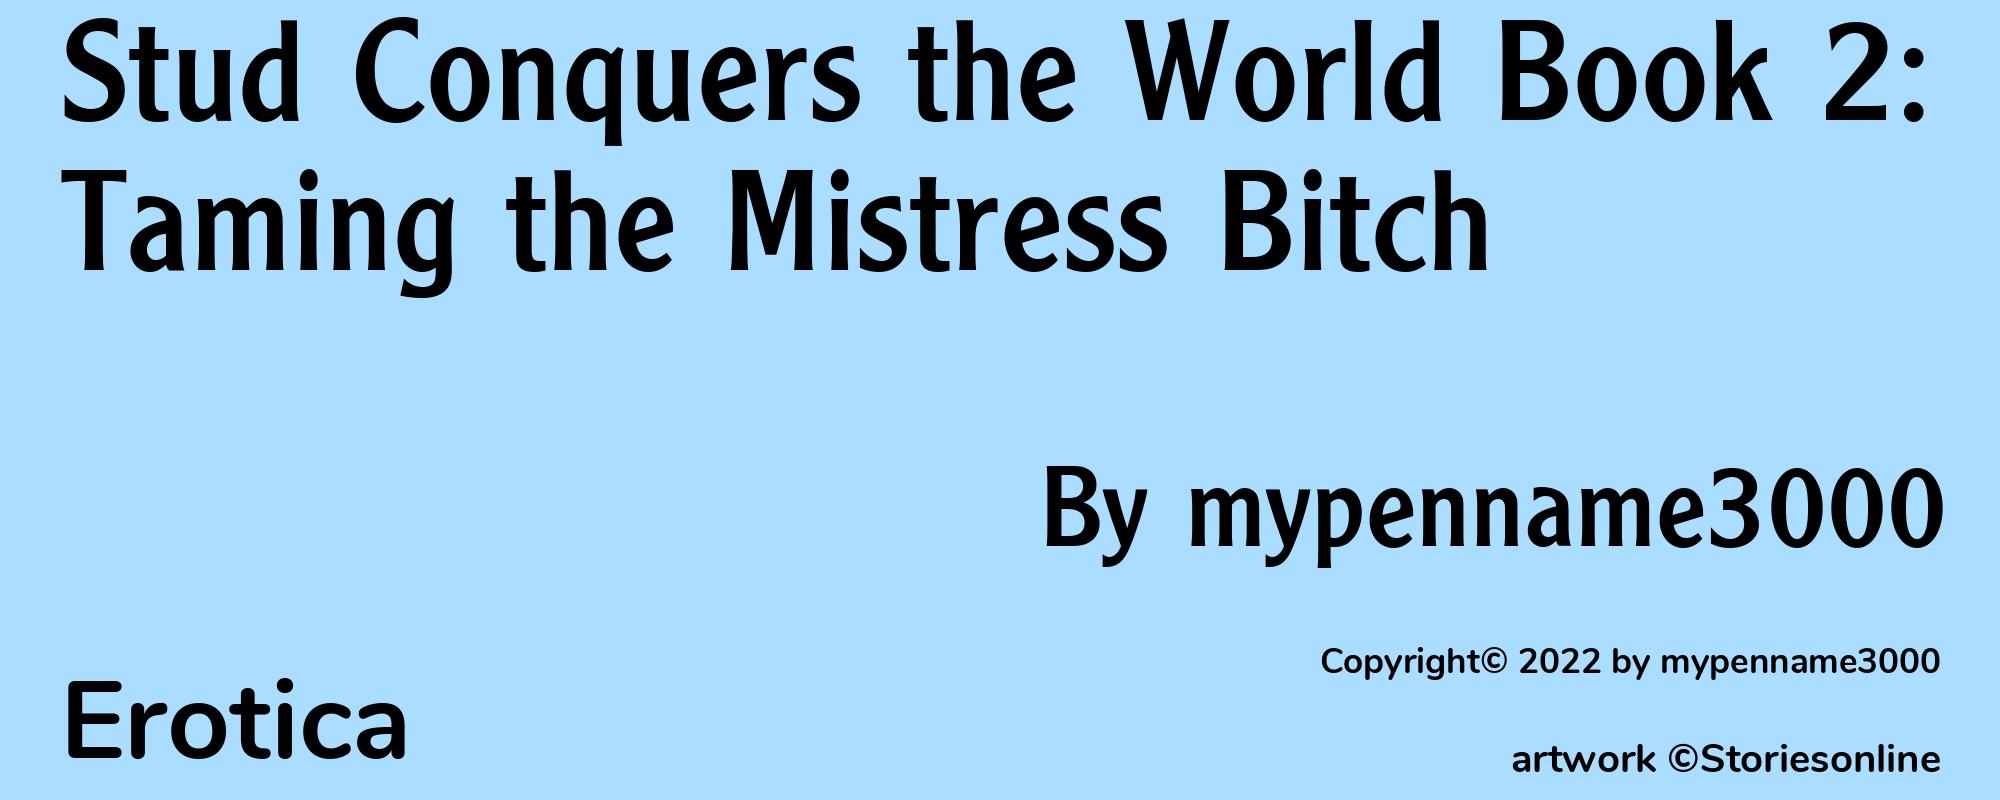 Stud Conquers the World Book 2: Taming the Mistress Bitch - Cover